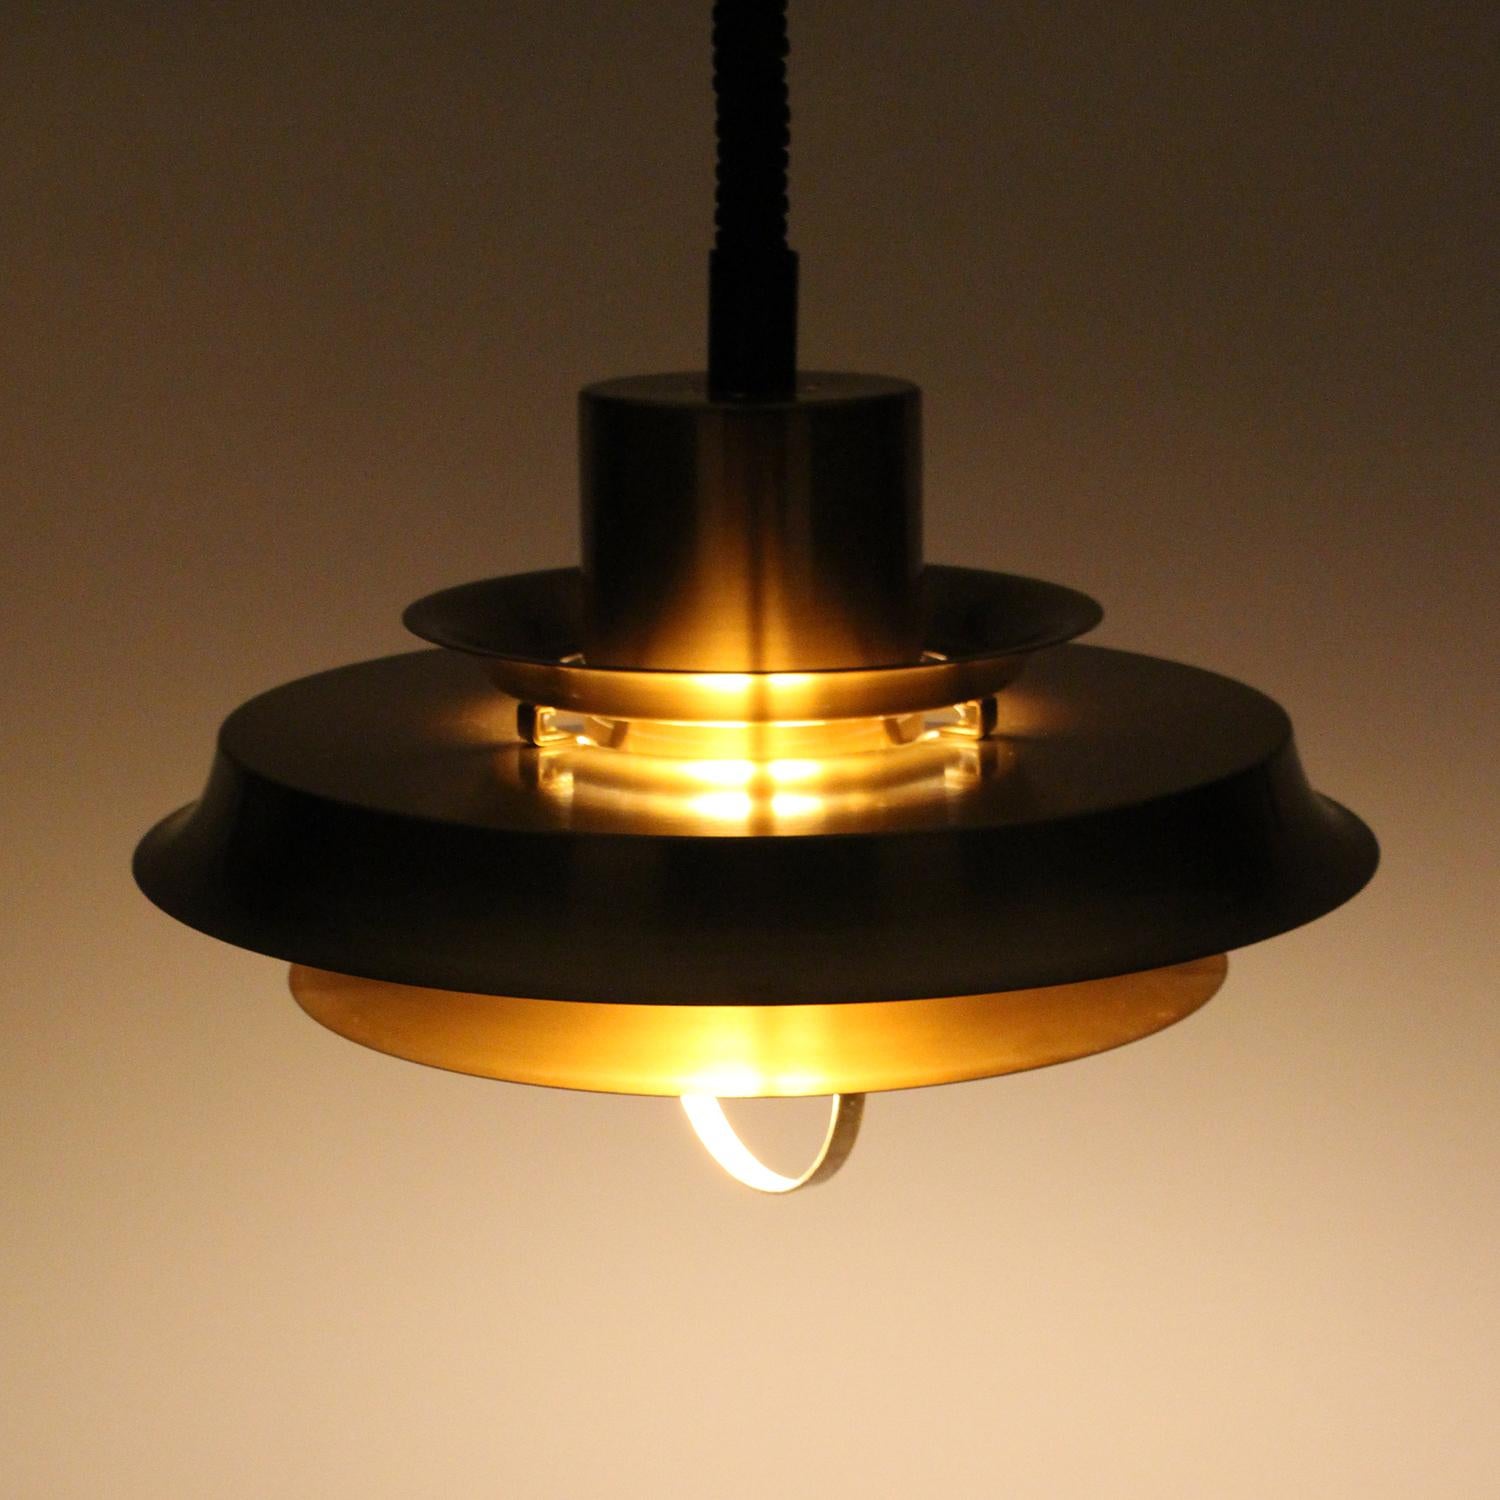 Brass Pendant by Vitrika 1960s Danish Vintage Lamp with Rise-and-fall Suspension 1